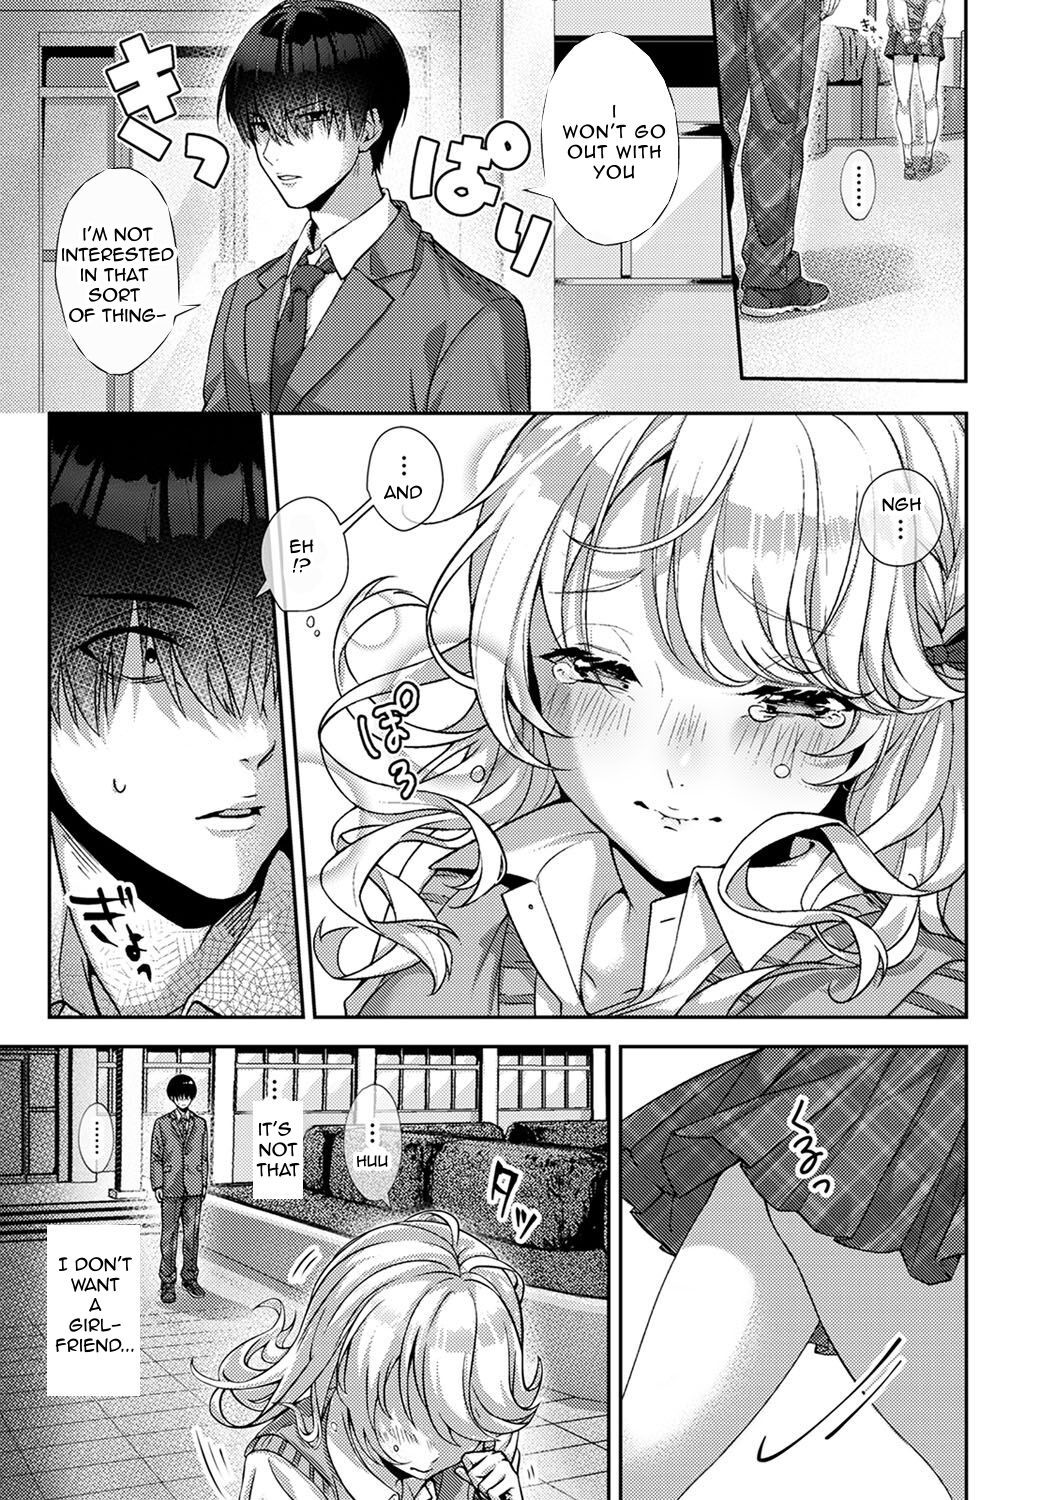 Hentai Manga Comic-My Classmate Is a Young Seductress Who Only Has Eyes For Me-Read-2